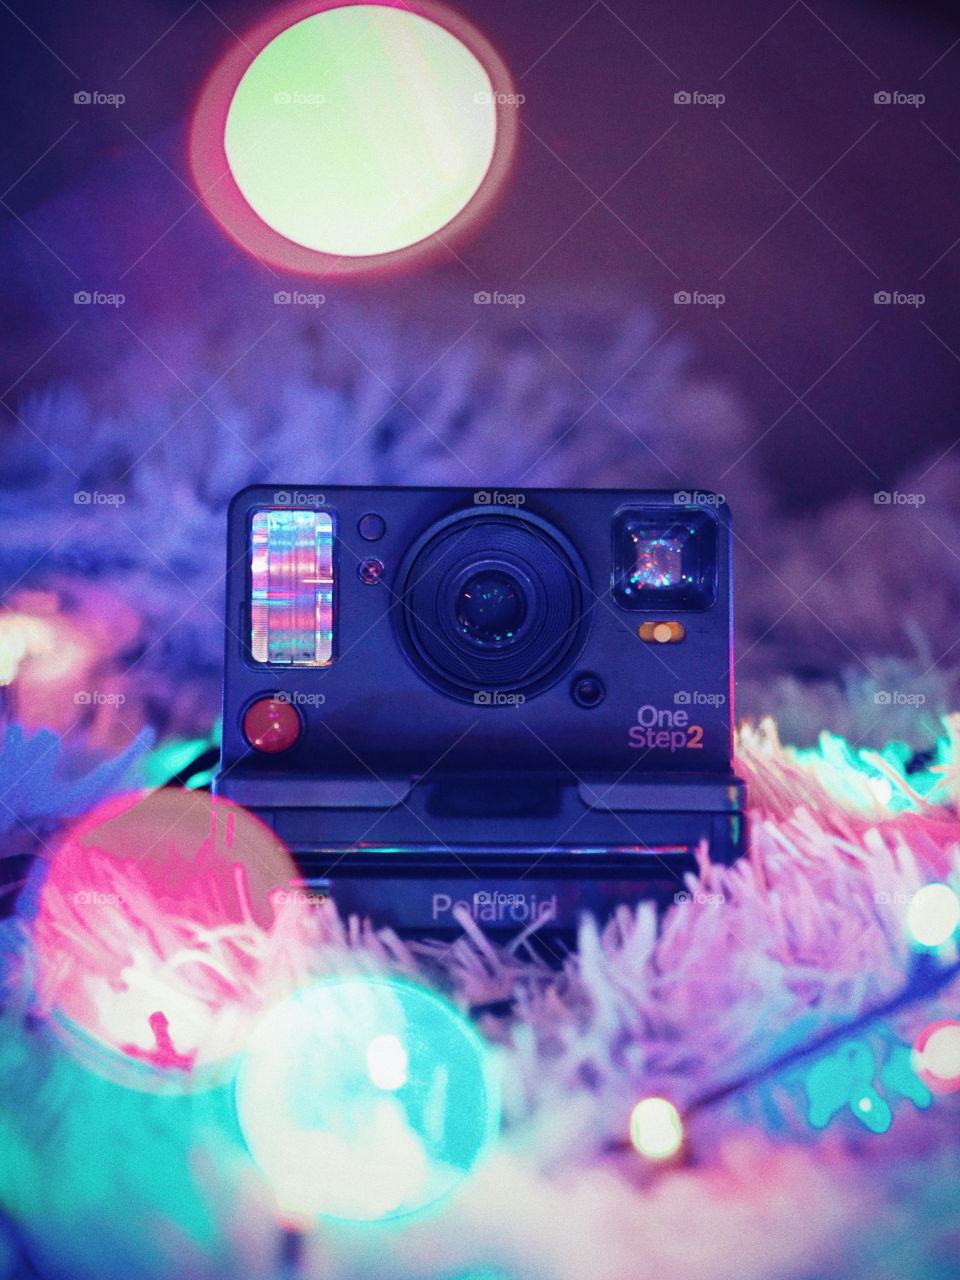 A photo of my first polaroid camera in Christmas lights.